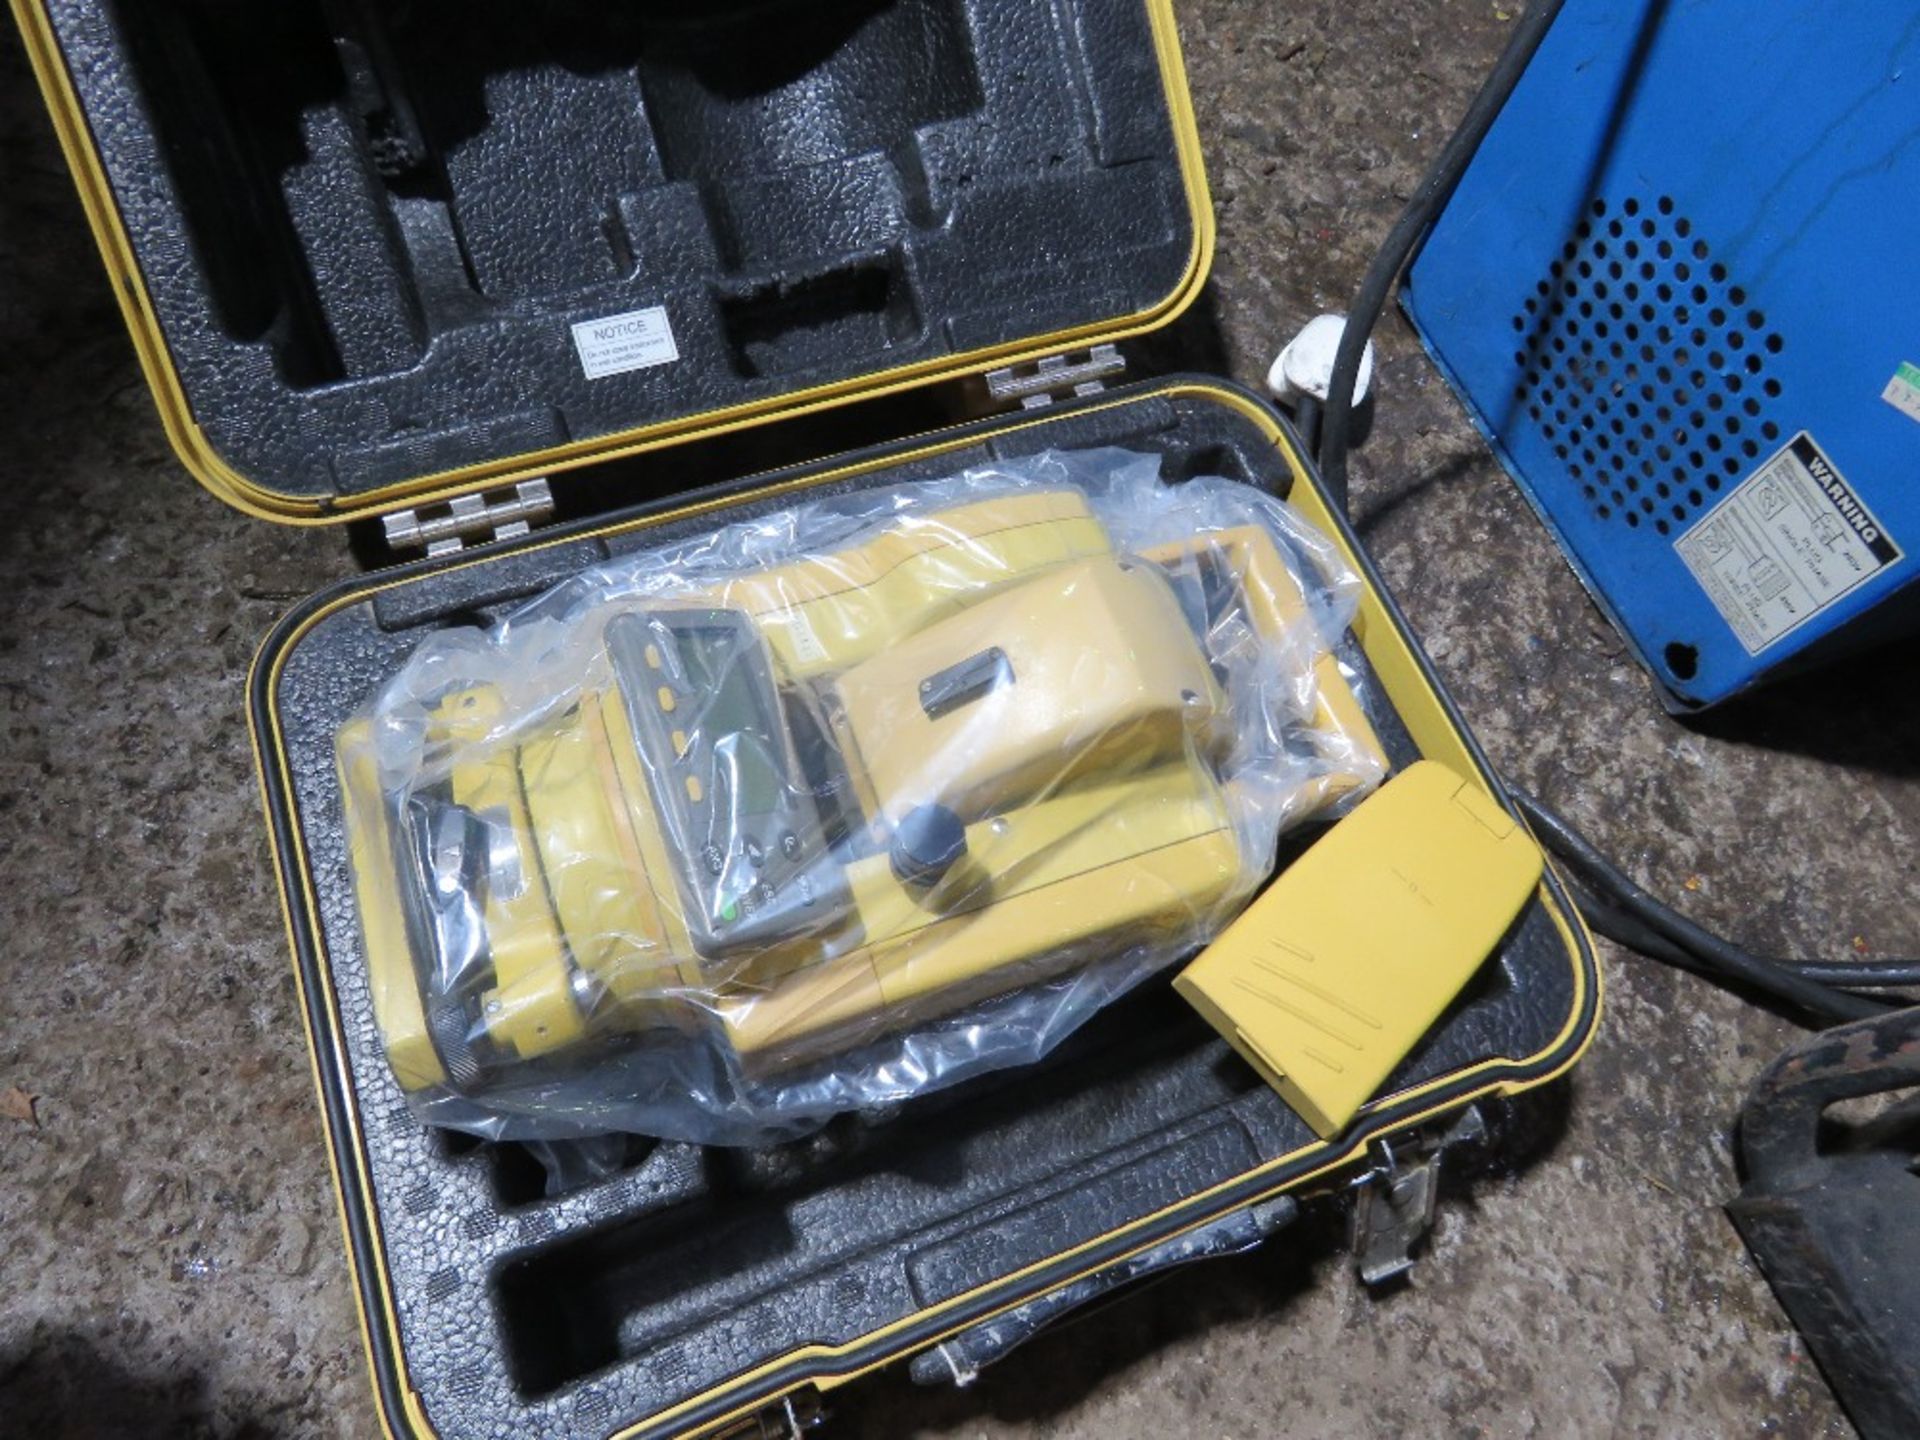 TOPCON GTS2100 TOTAL SURVEY STATION THEODOLITE IN A CASE. DIRECT FROM LOCAL COMPANY DUE TO A CHANGE